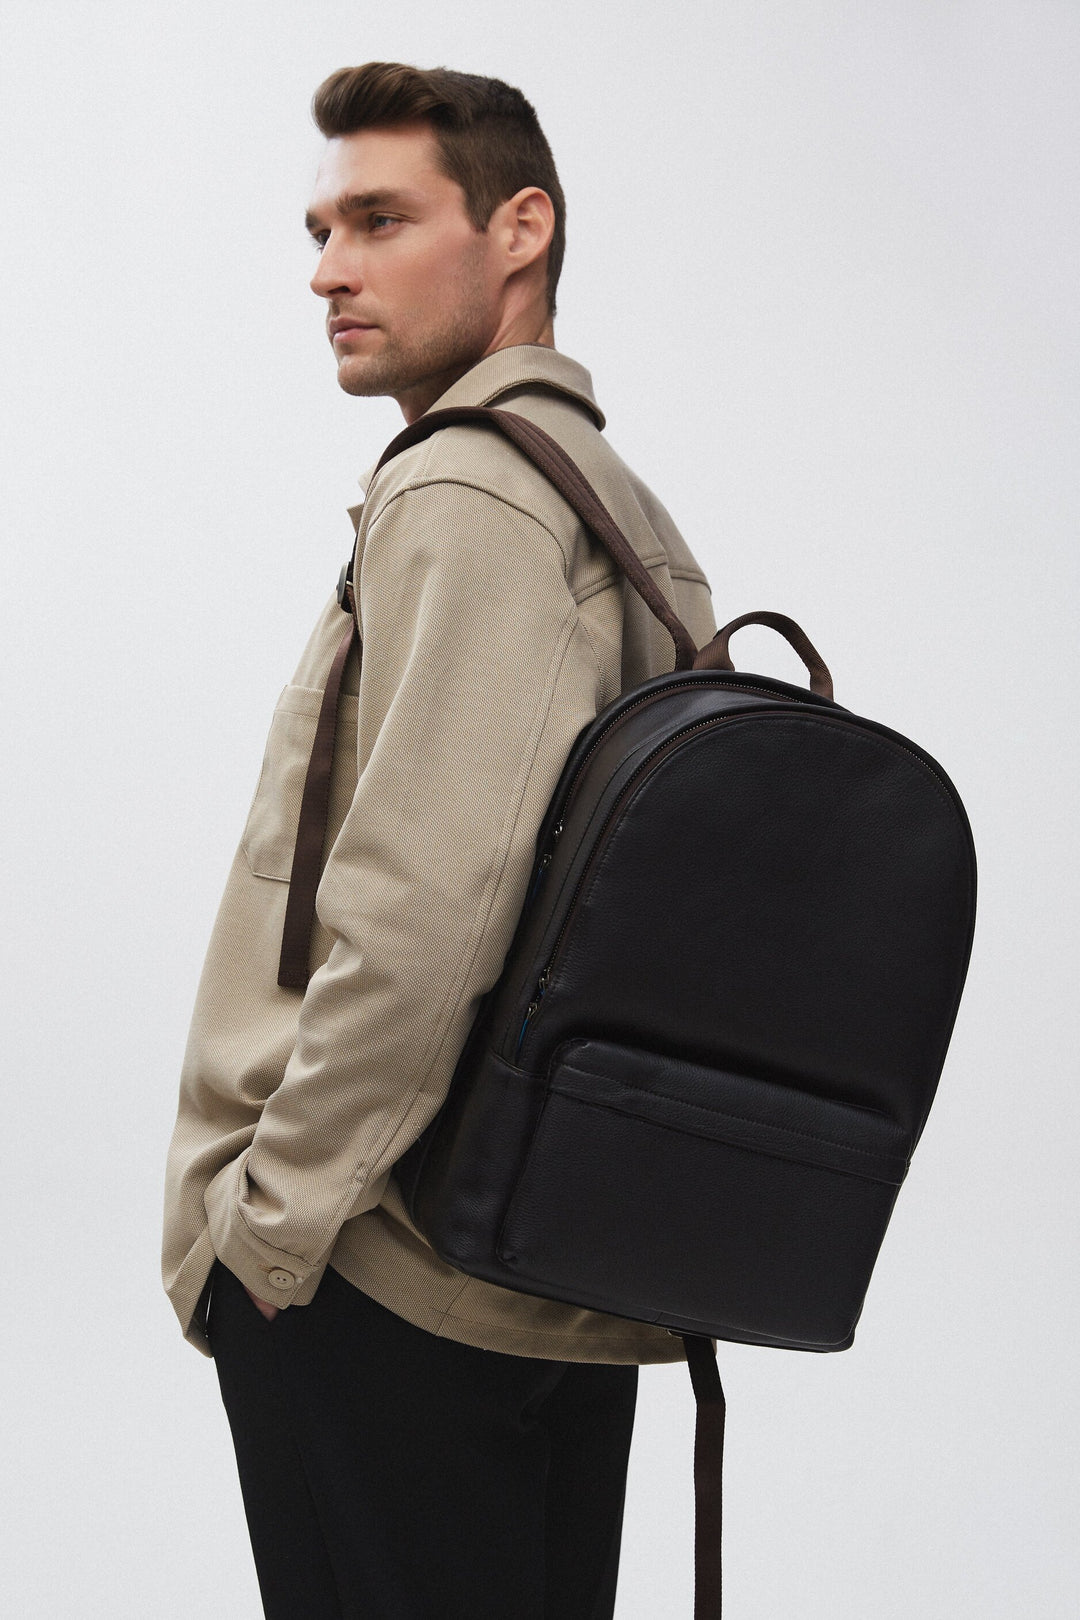 Men's Saddle Brown Backpack made of Genuine Leather with Wide Shoulder Straps Estro - fully-stylized backpack.